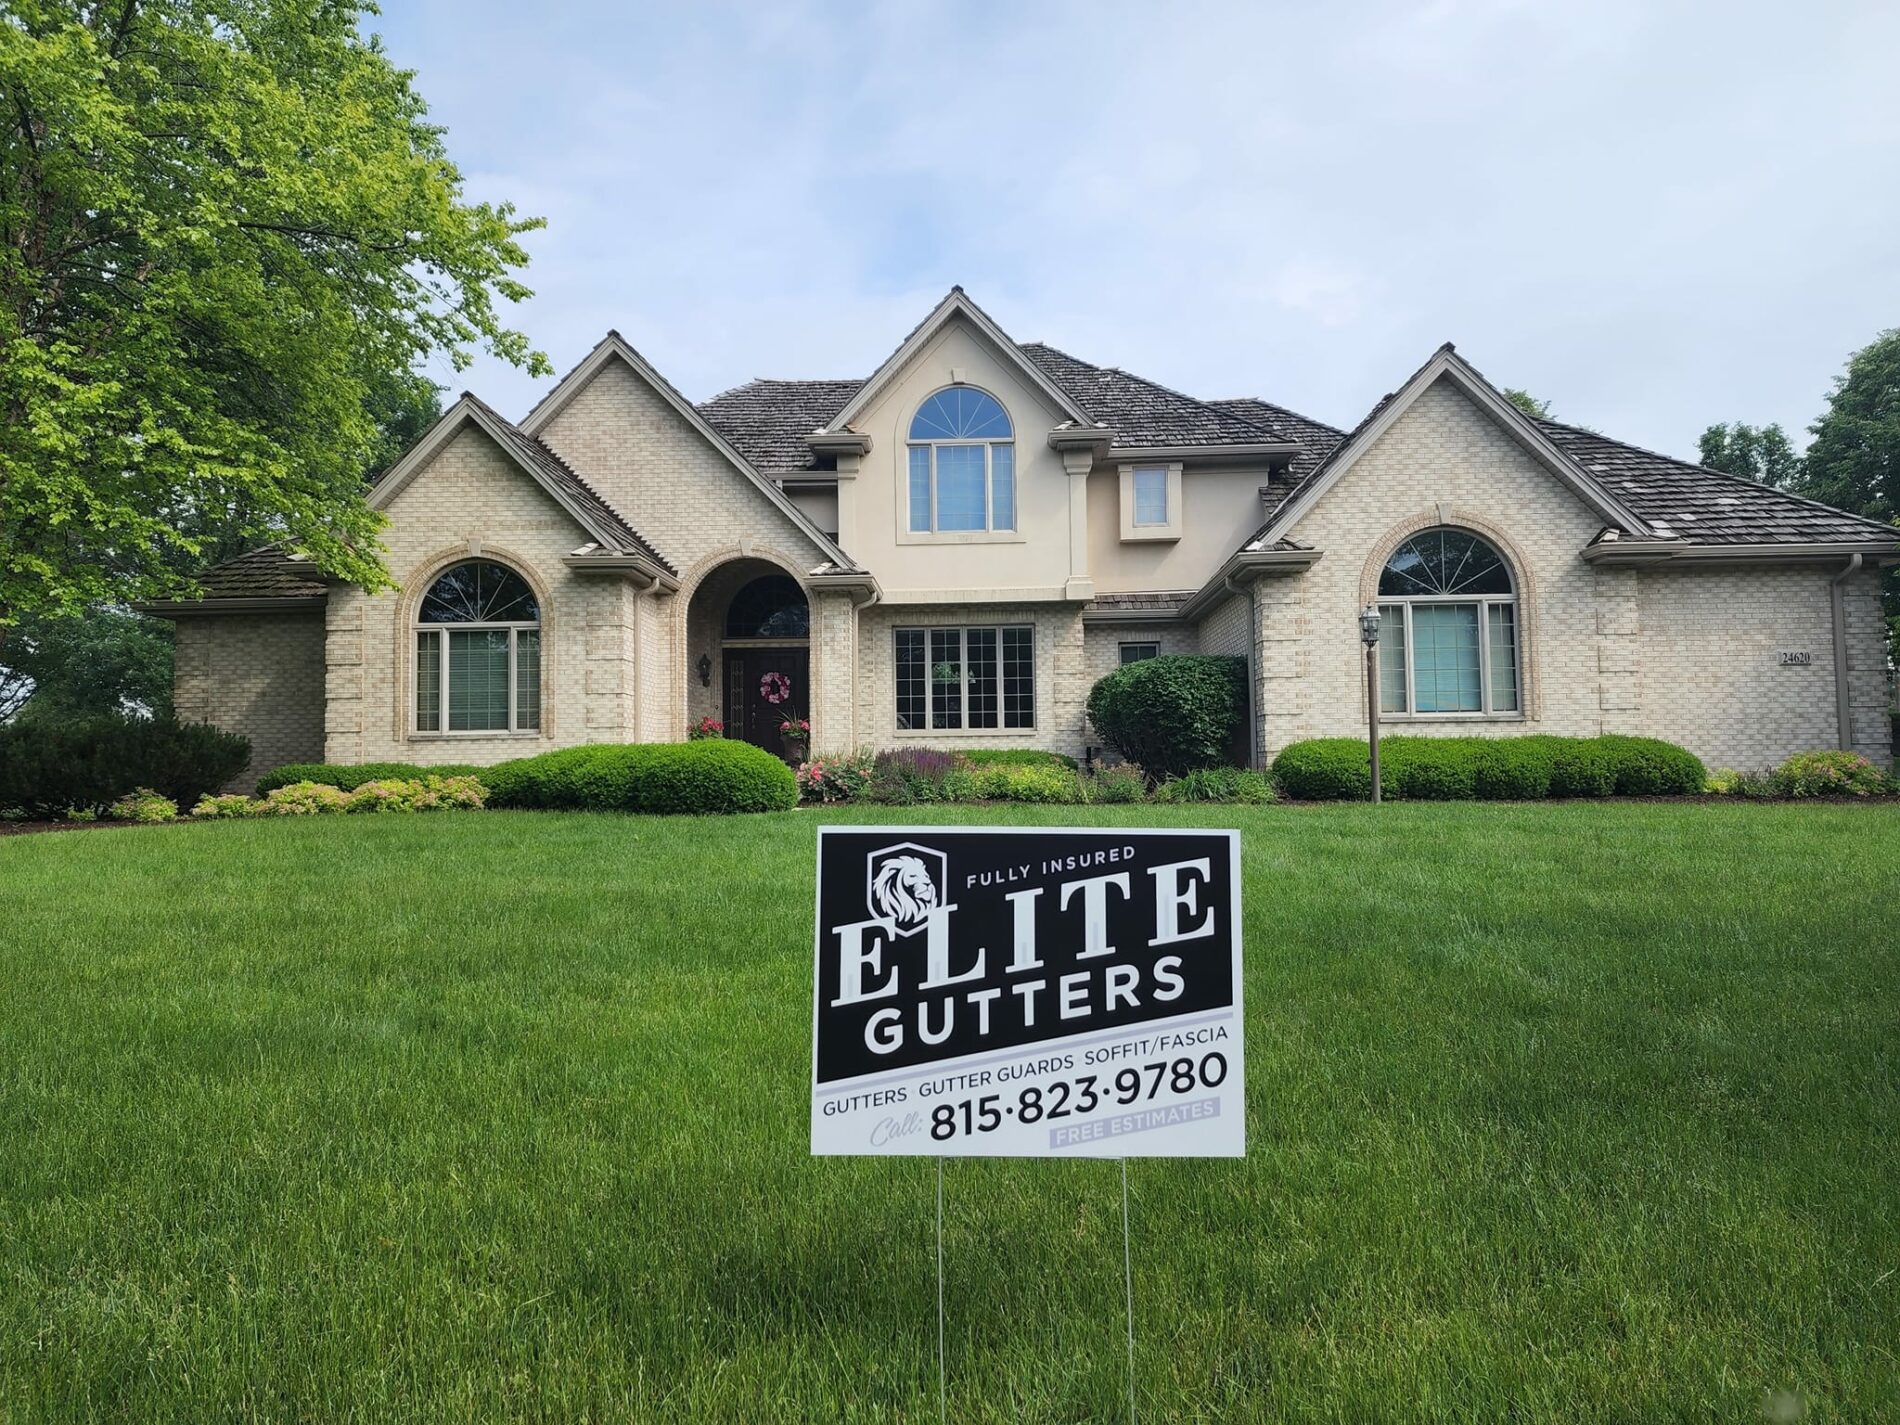 gutter cleaning Shorewood IL